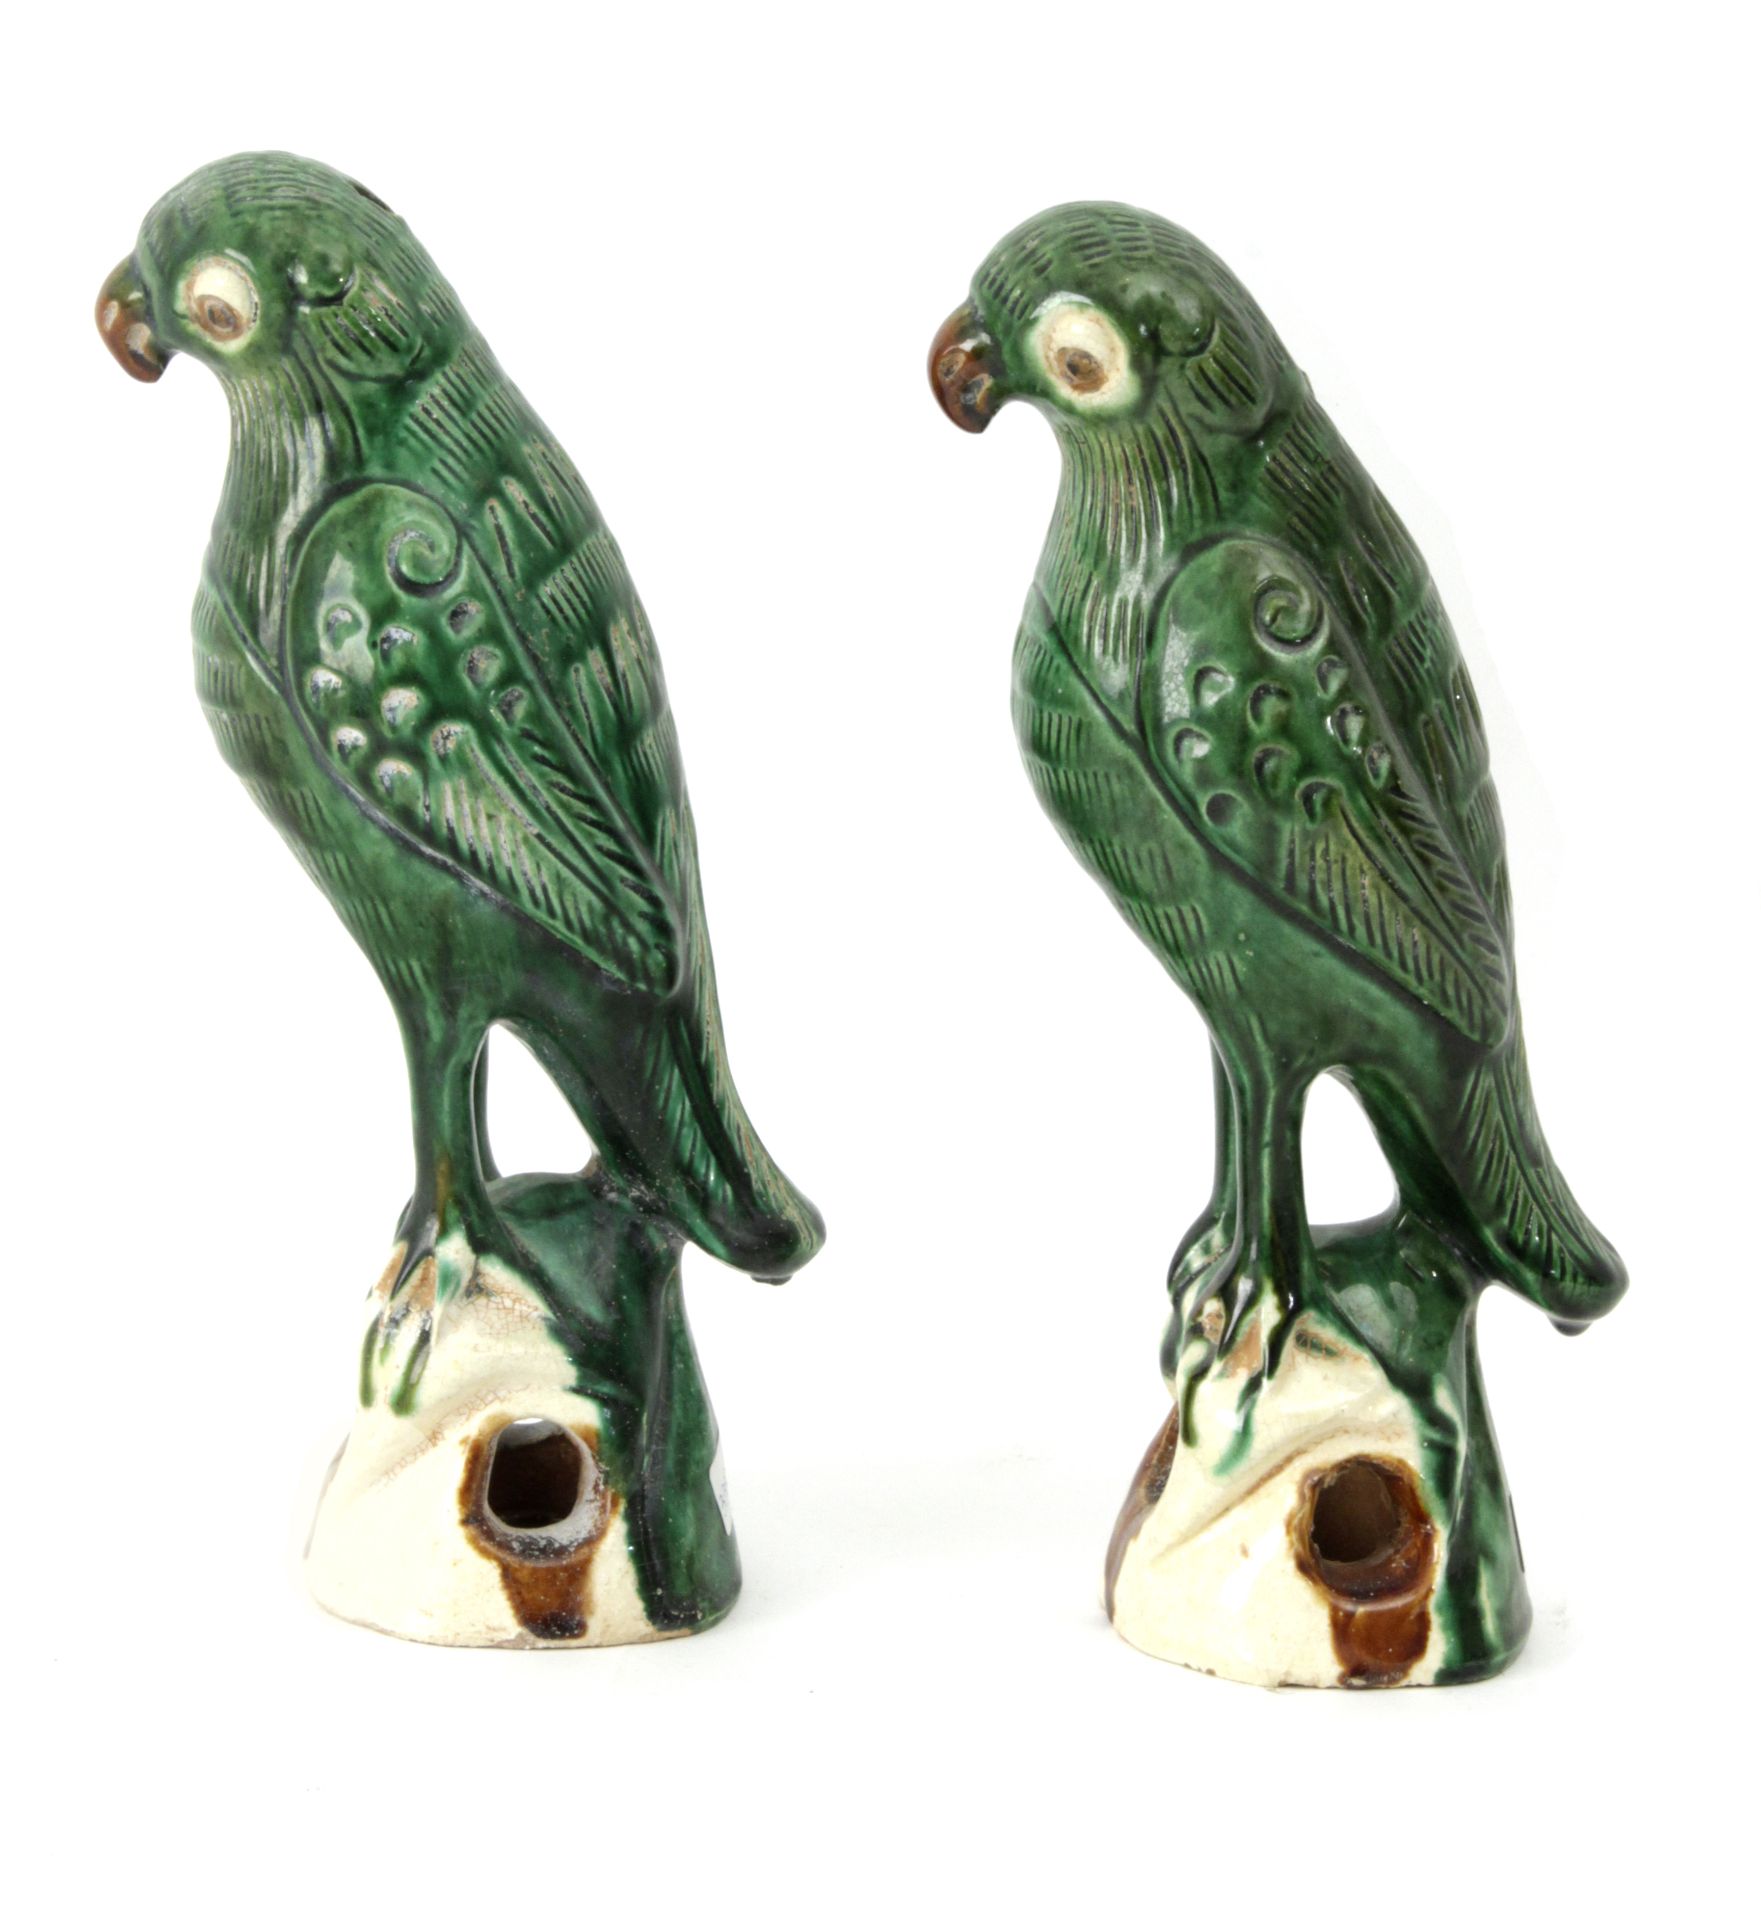 A pair of first half of 20th century Chinese figure of birds in polychrome porcelain - Image 2 of 4